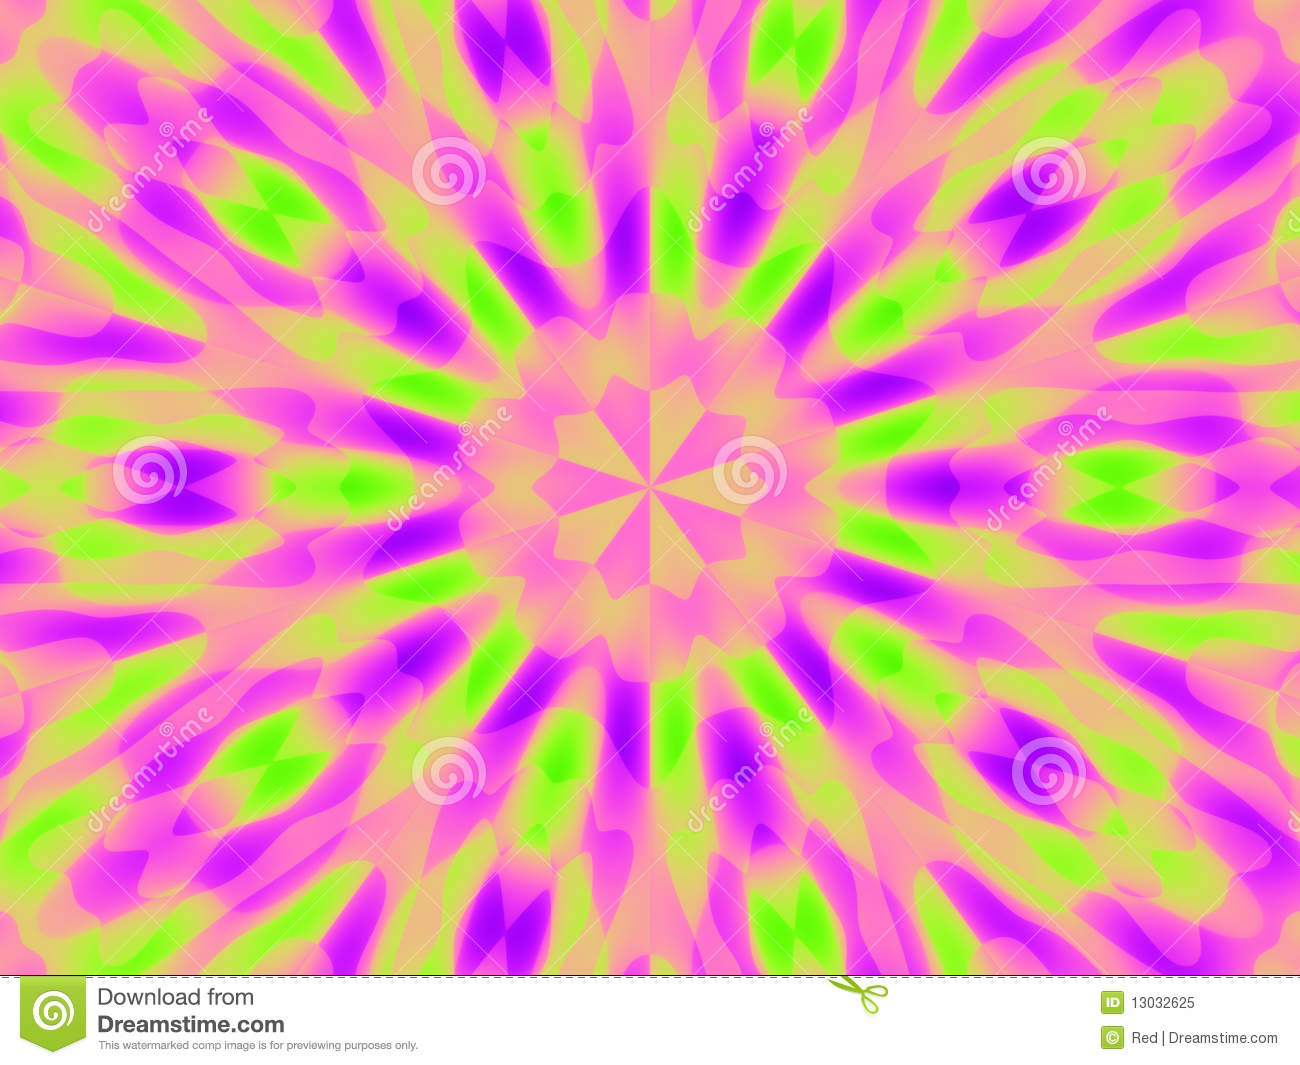 Computer Generated Tie Dye Style Pattern Background In Pinks And